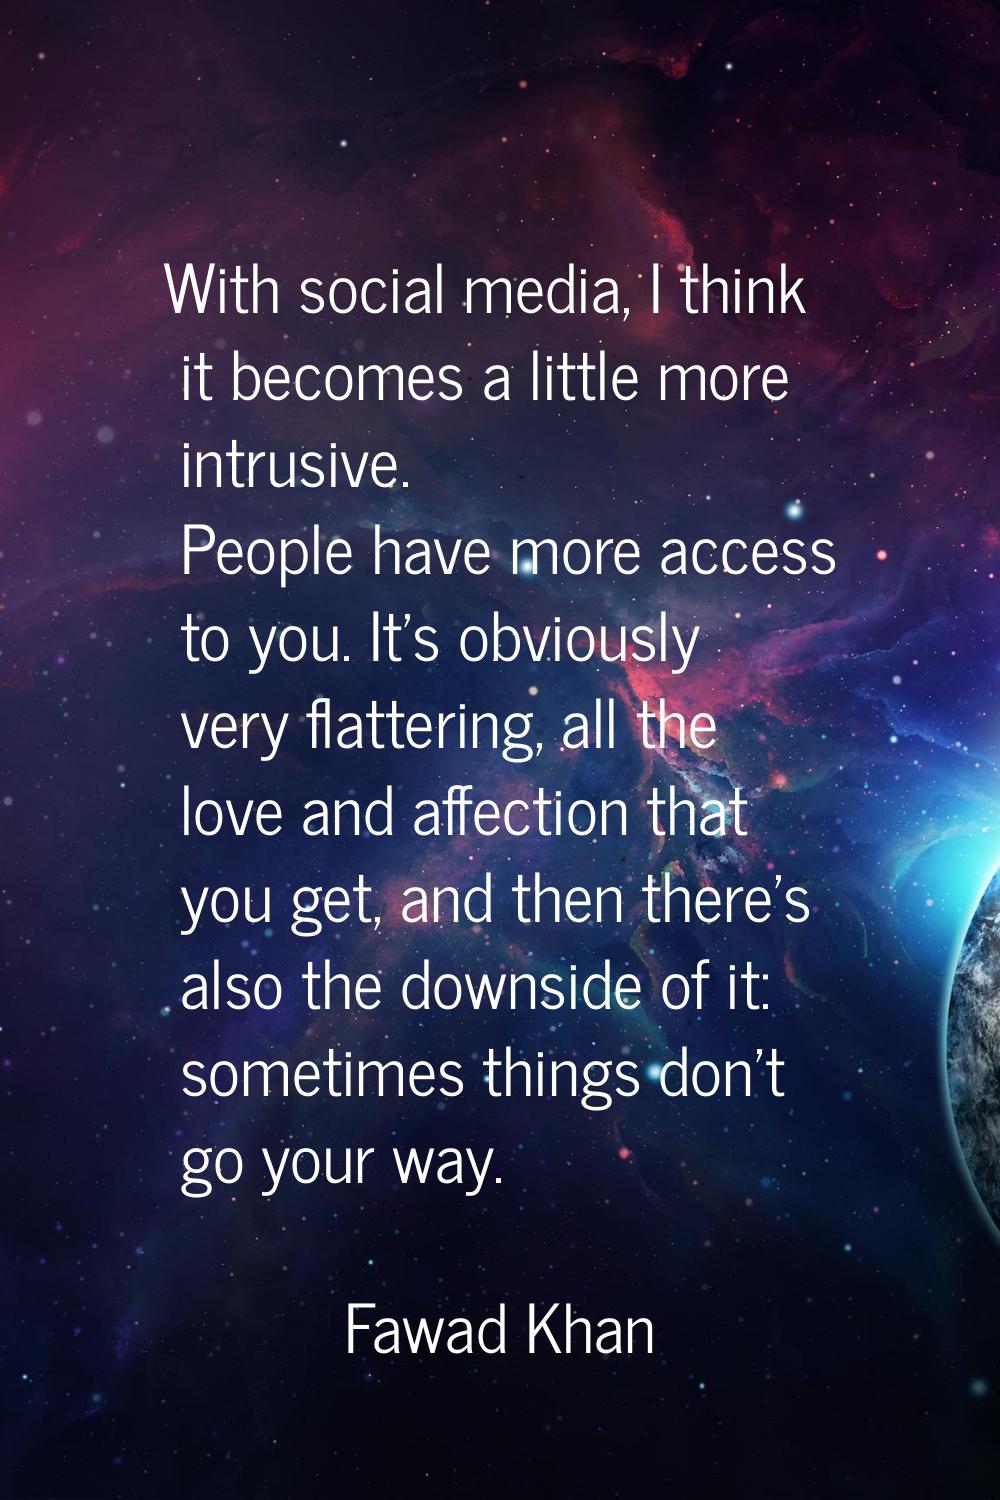 With social media, I think it becomes a little more intrusive. People have more access to you. It's